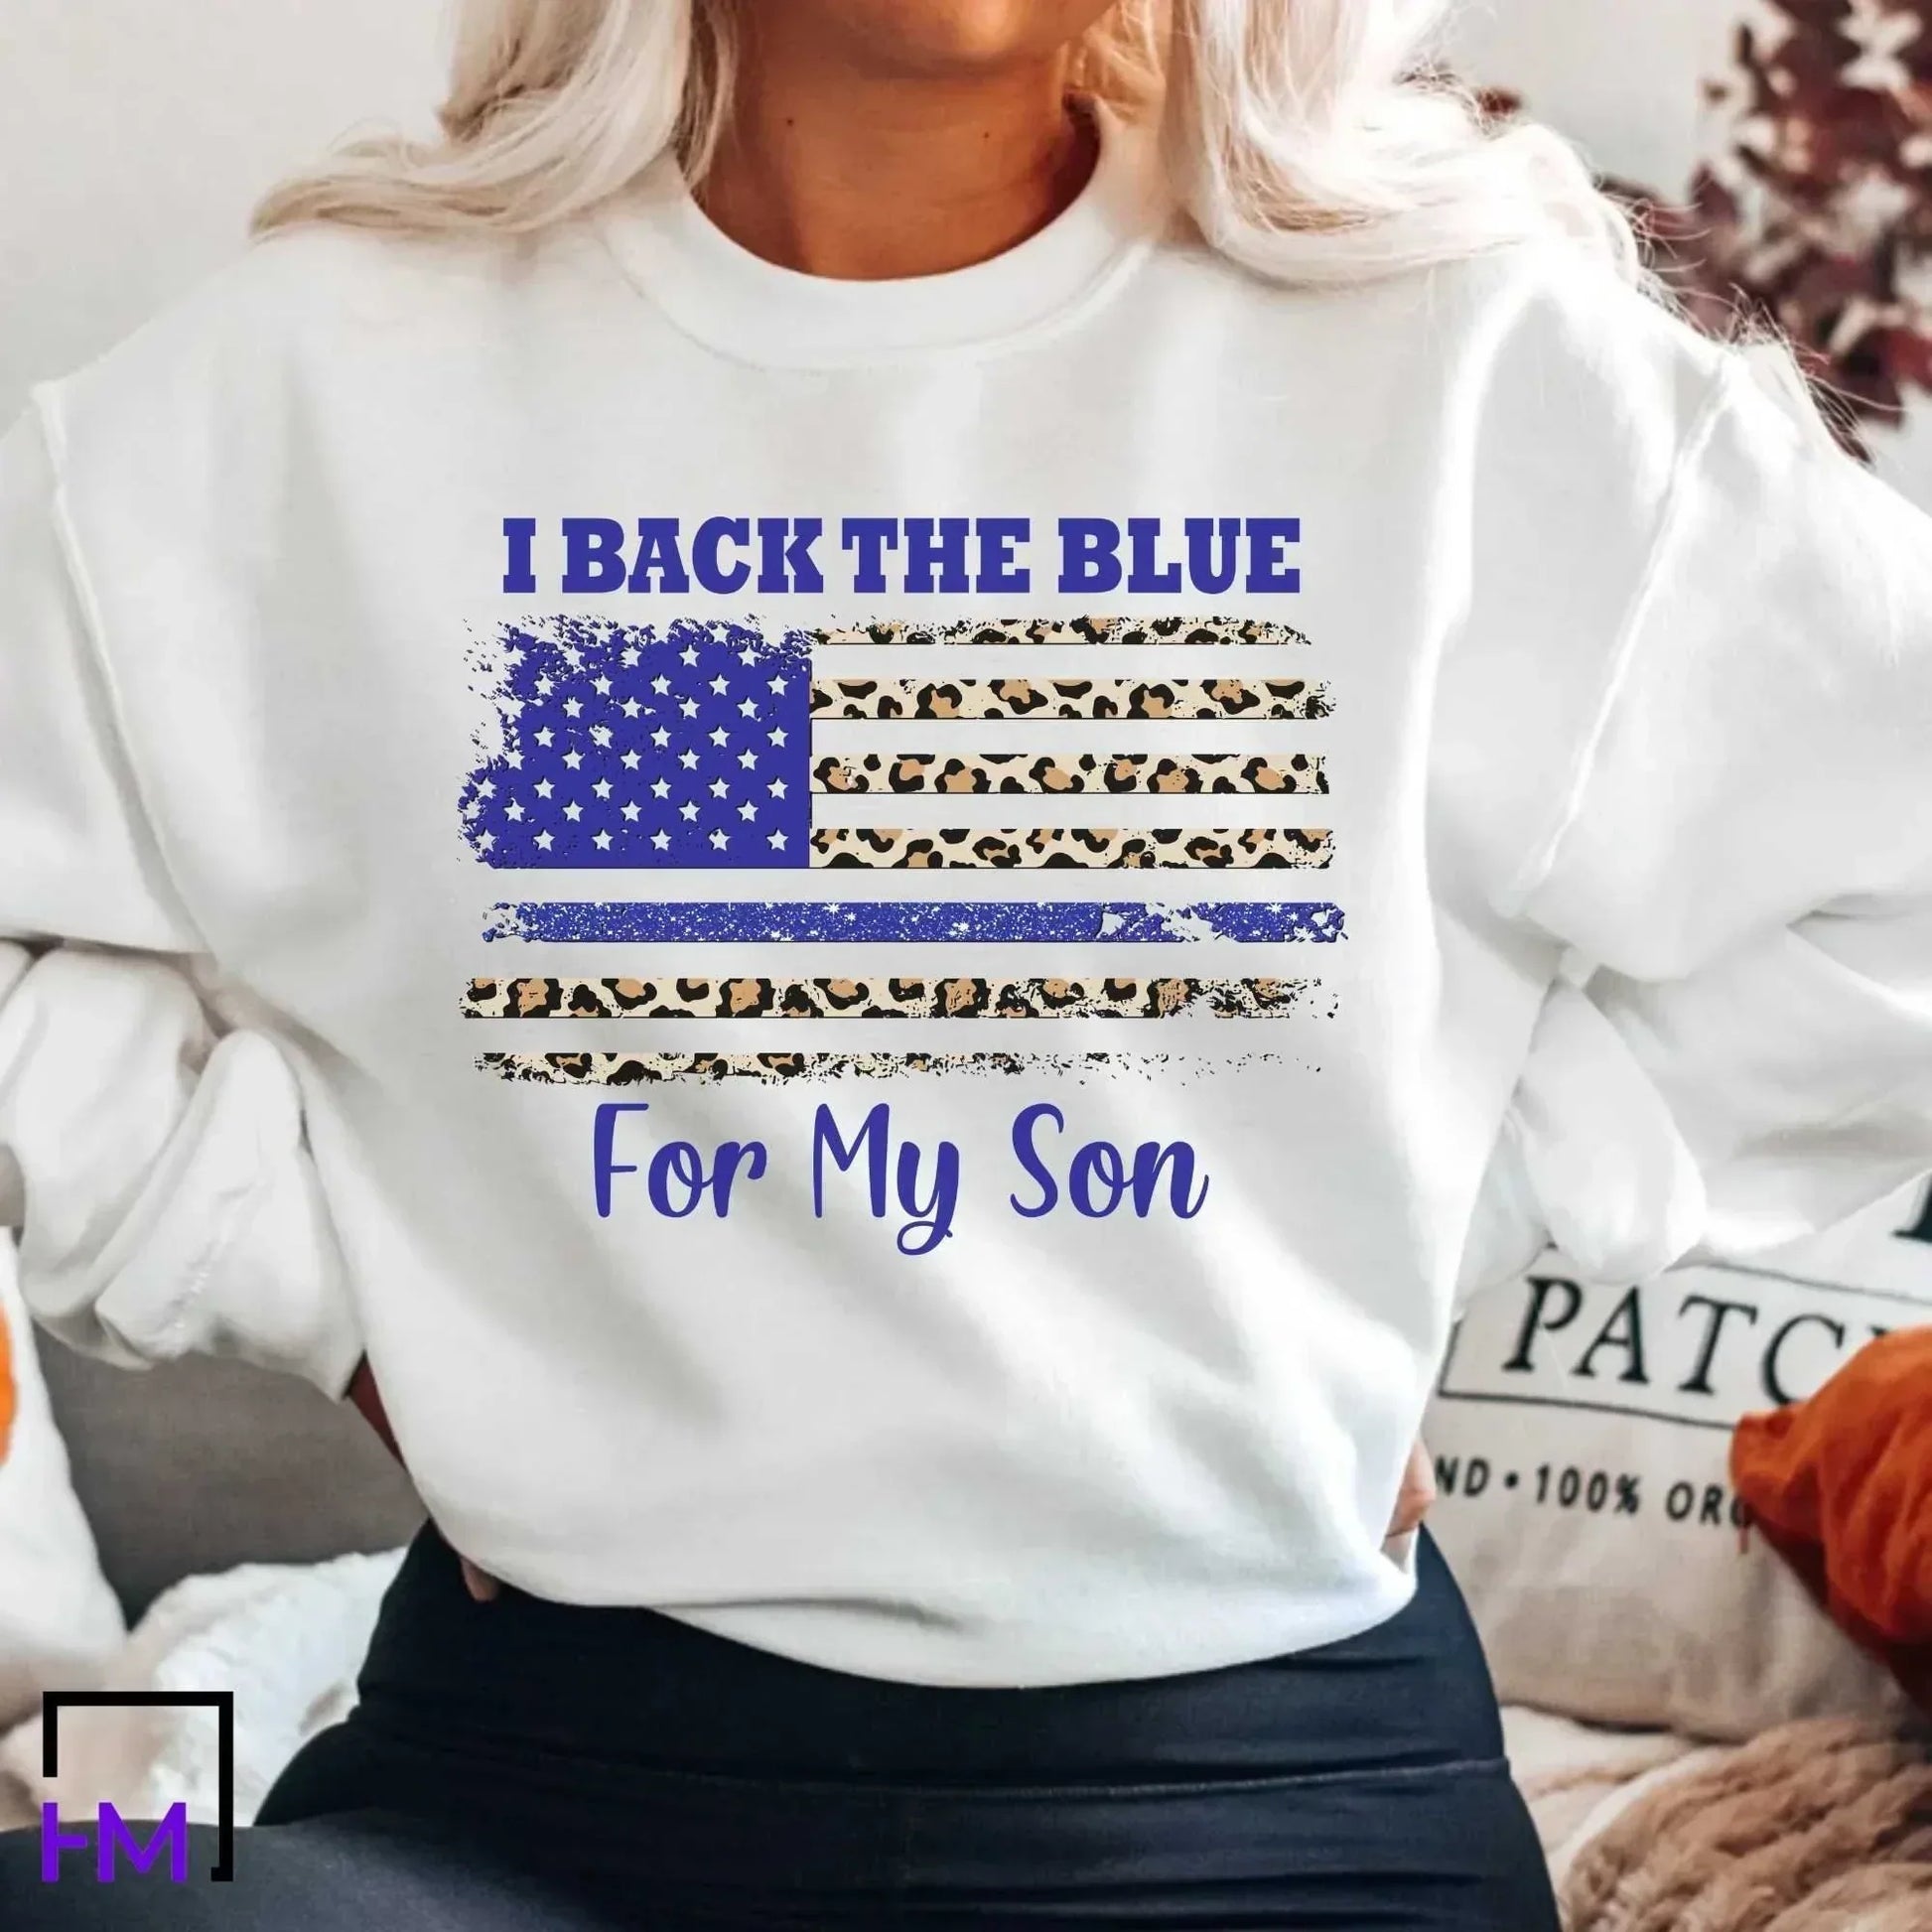 Police Shirt for Women, Police Wife Shirt, Police Mom Shirt, Police Mom Gift, Thin Blue Line Shirt, Gift for Police's Wife, Police Officer HMDesignStudioUS